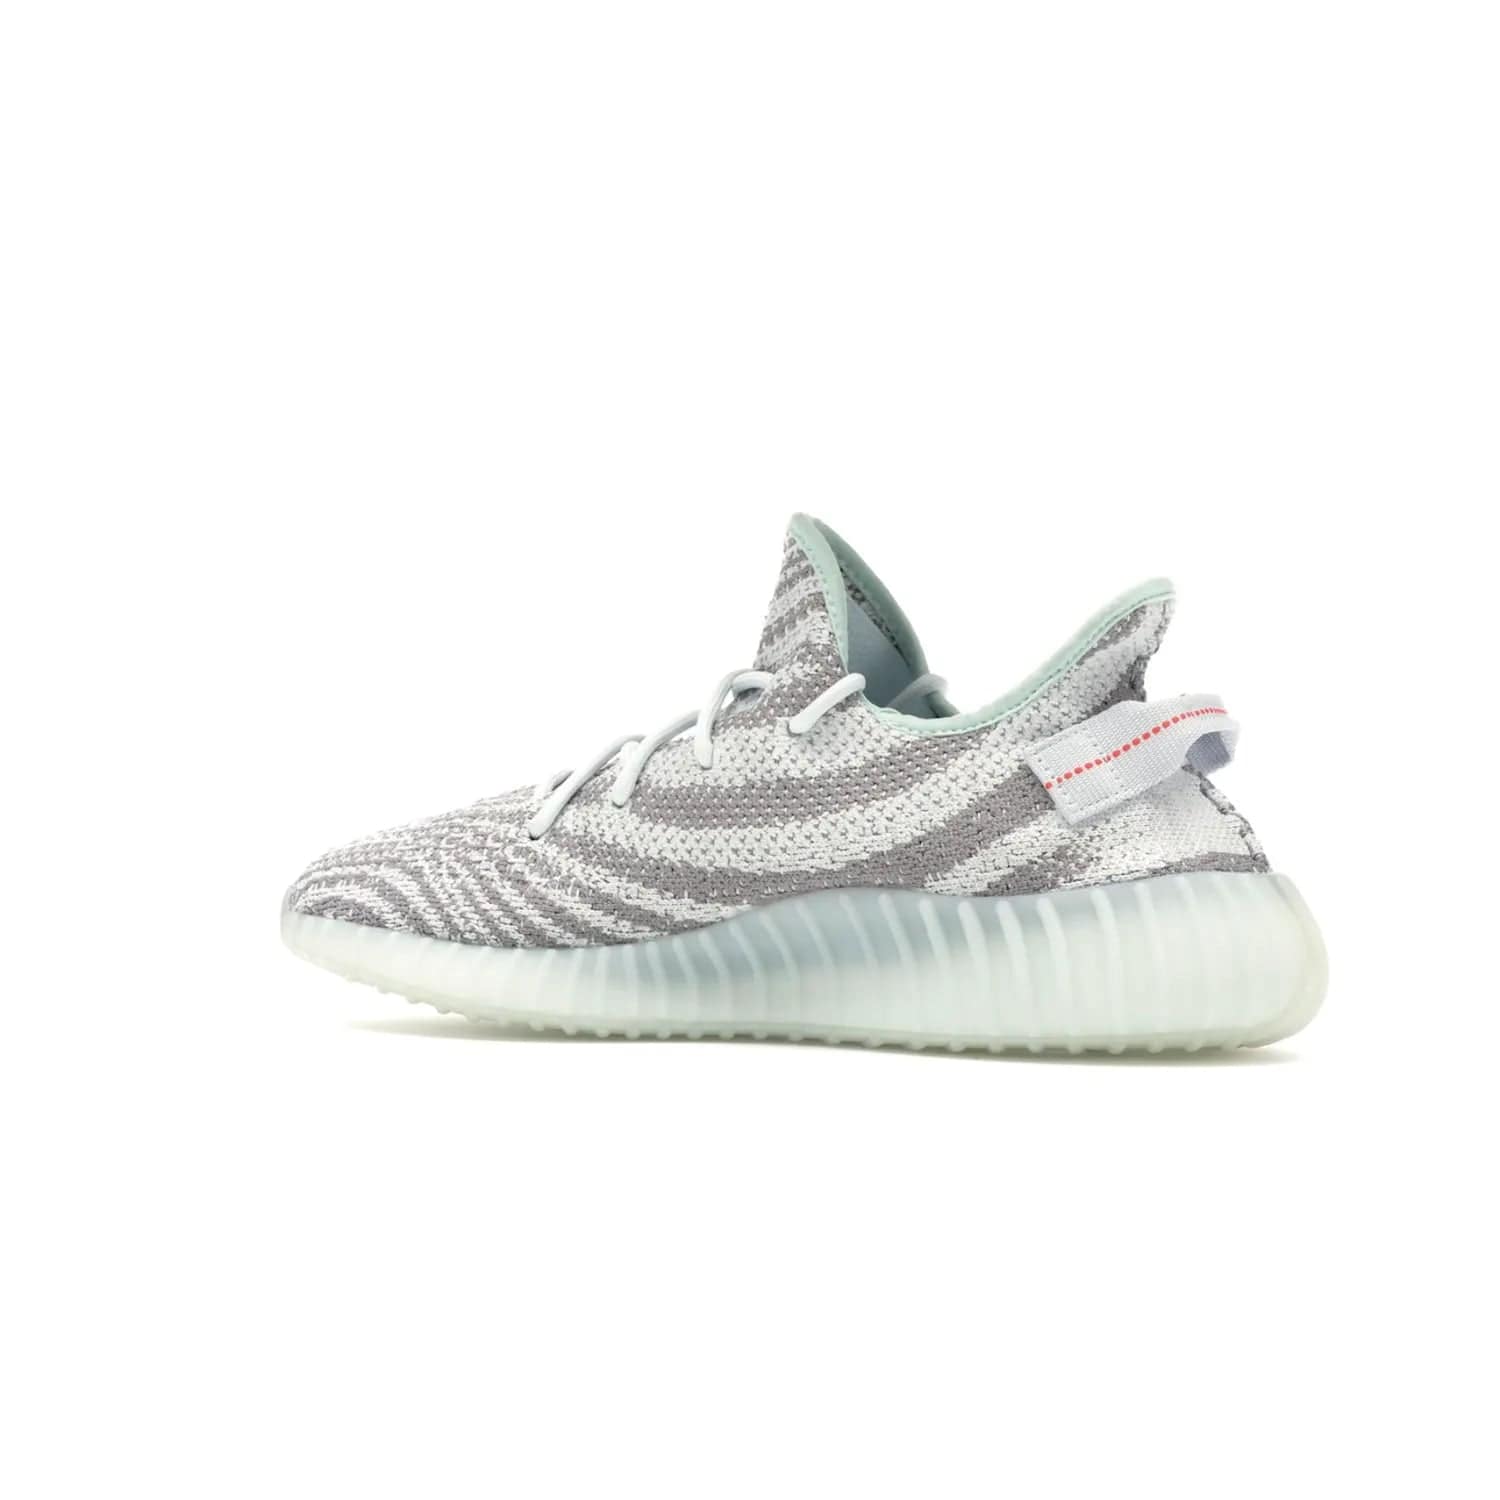 adidas Yeezy Boost 350 V2 Blue Tint - Image 22 - Only at www.BallersClubKickz.com - The adidas Yeezy Boost 350 V2 Blue Tint merges fashion and functionality with its Primeknit upper and Boost sole. Released in December 2017, this luxurious sneaker is perfect for making a stylish statement.